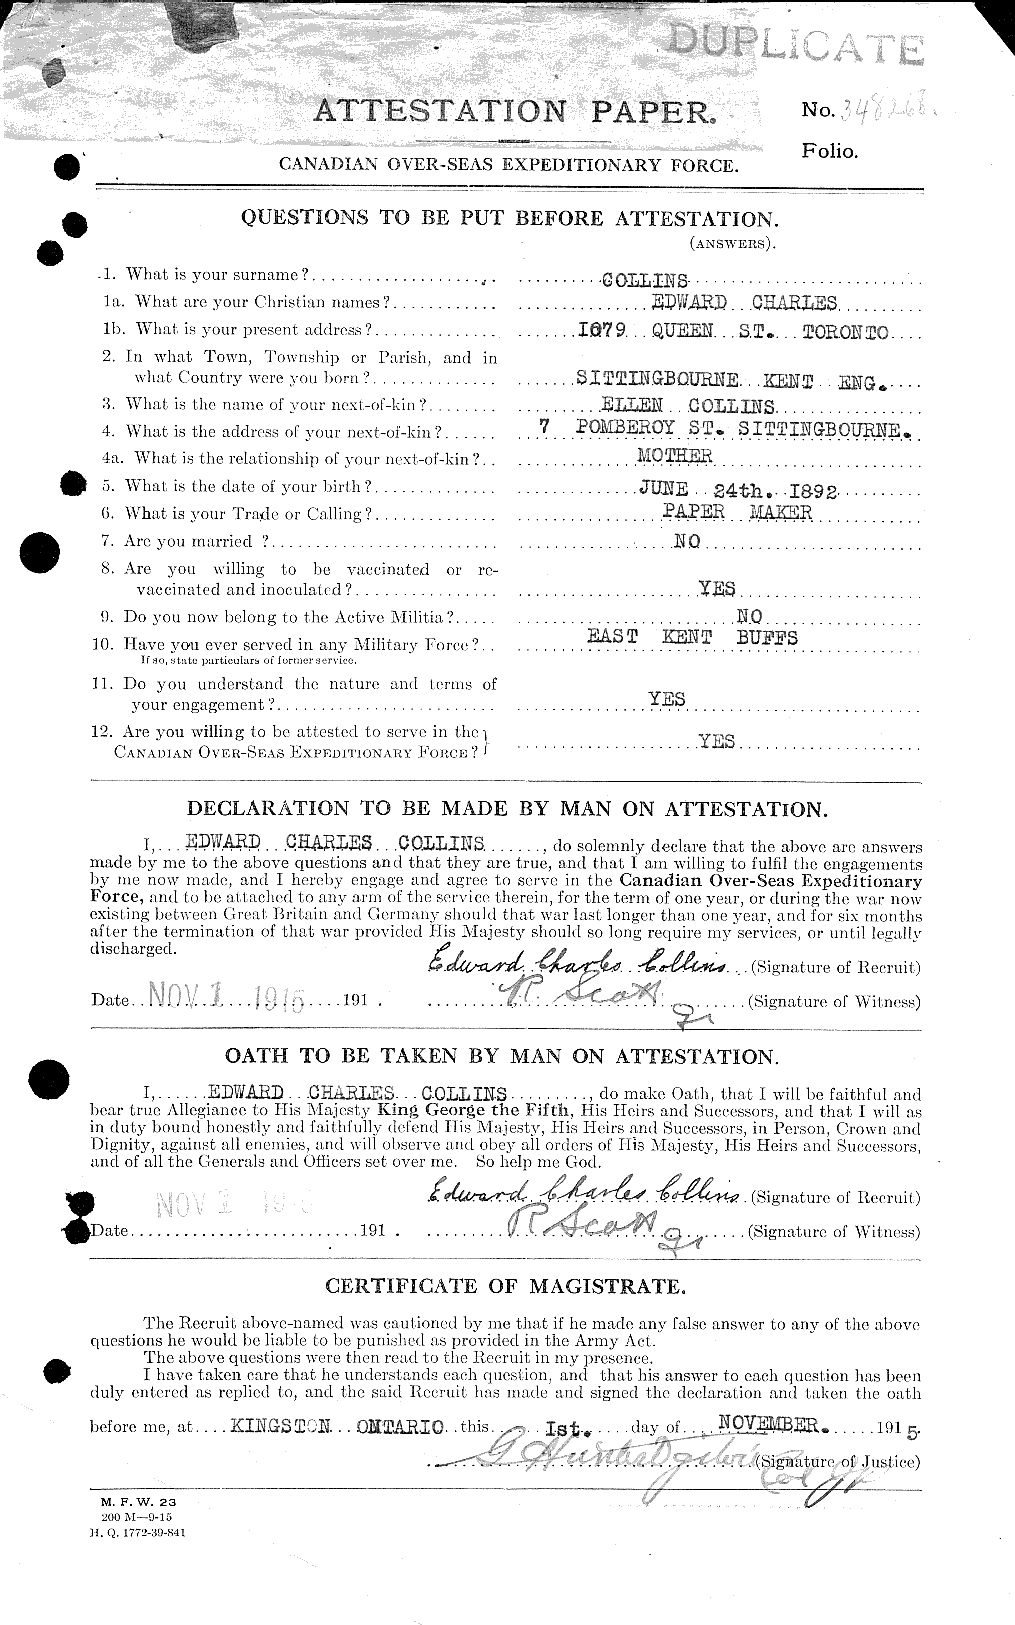 Personnel Records of the First World War - CEF 037747a